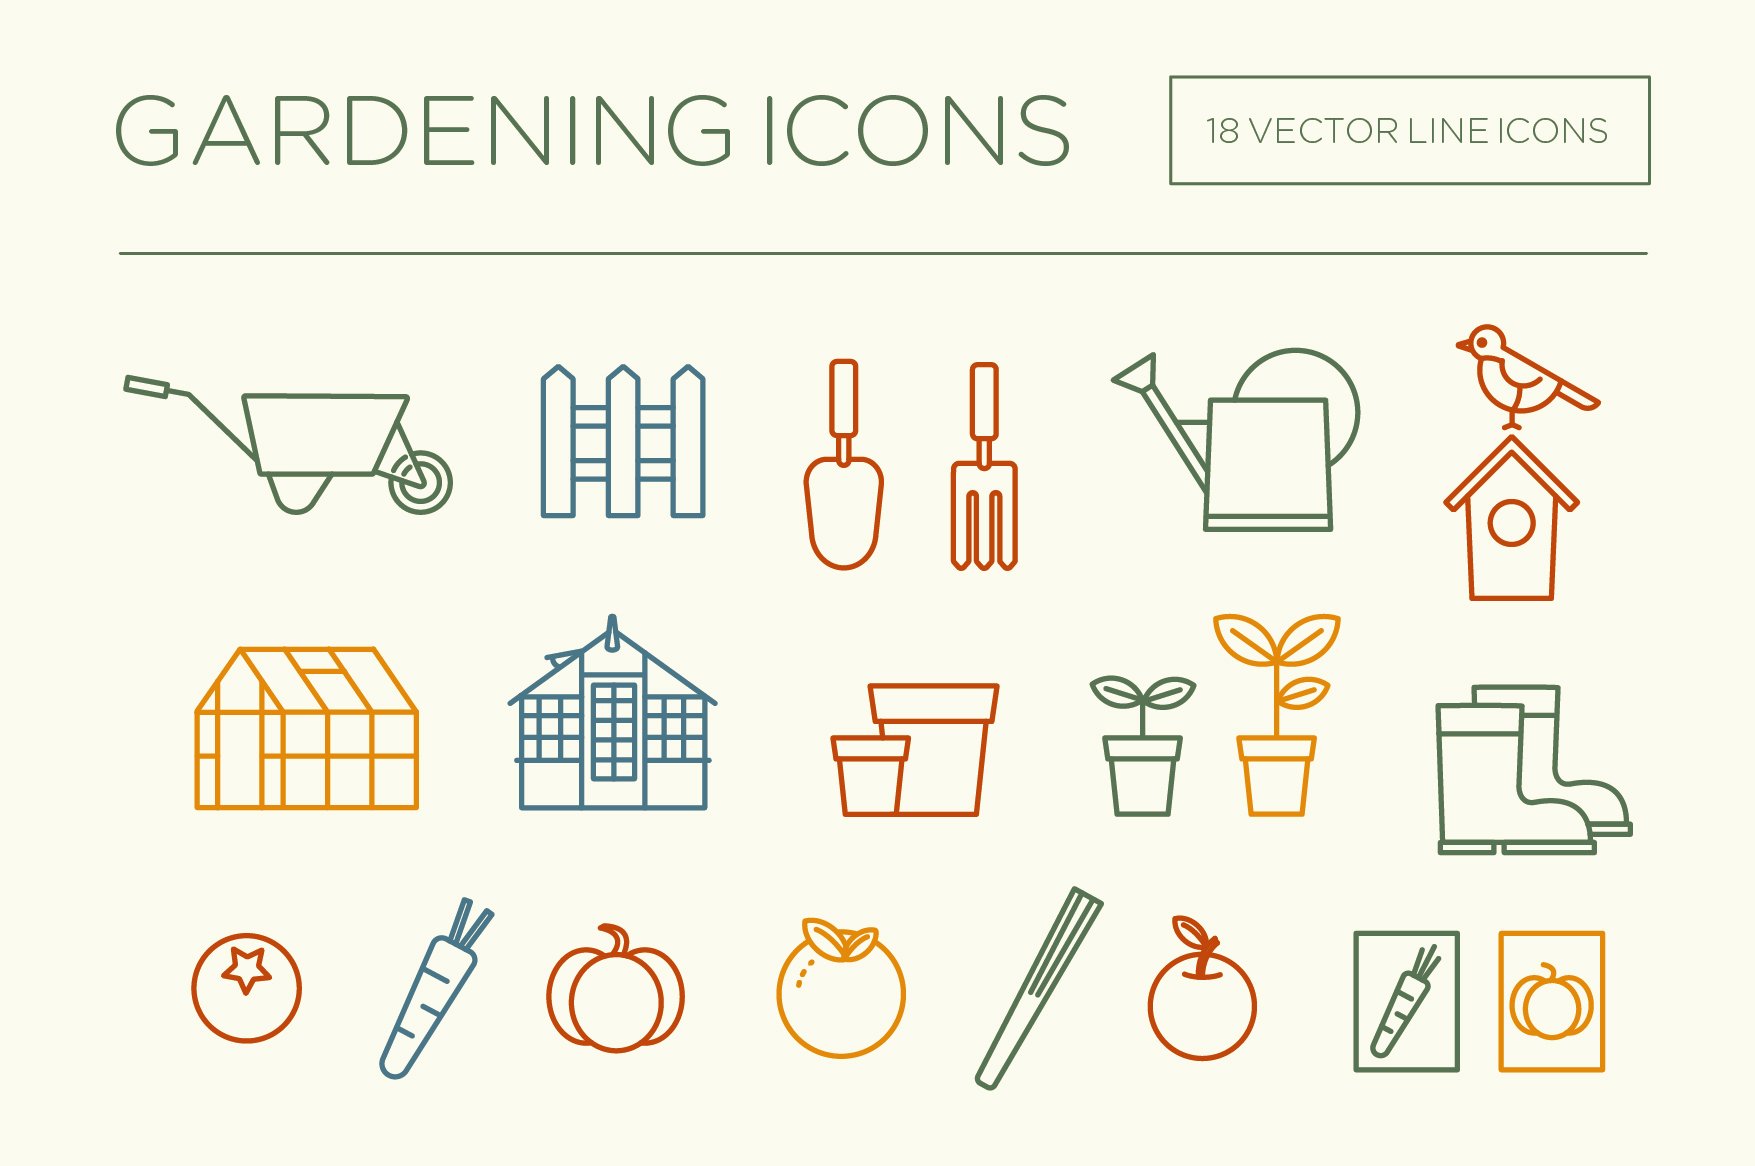 Gardening icons cover image.